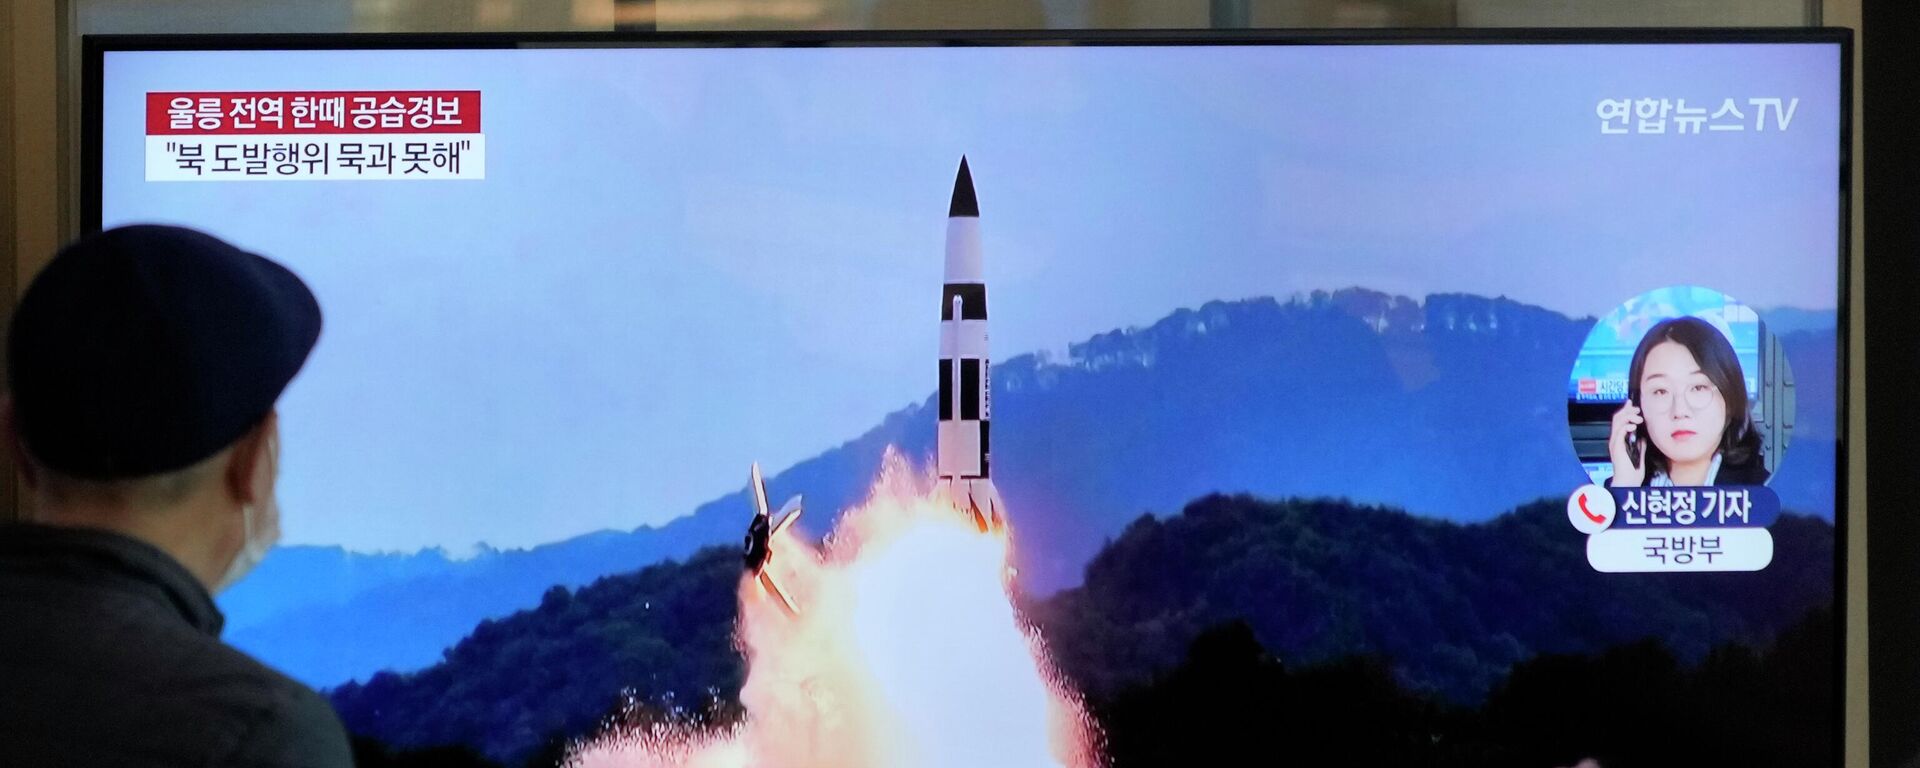 A TV screen shows a file image of North Korea's missile launch during a news program at the Seoul Railway Station in Seoul, South Korea, Wednesday, Nov. 2, 2022. South Korea says it has issued an air raid alert for residents on an island off its eastern coast after North Korea fired a few missiles toward the sea - Sputnik International, 1920, 02.11.2022